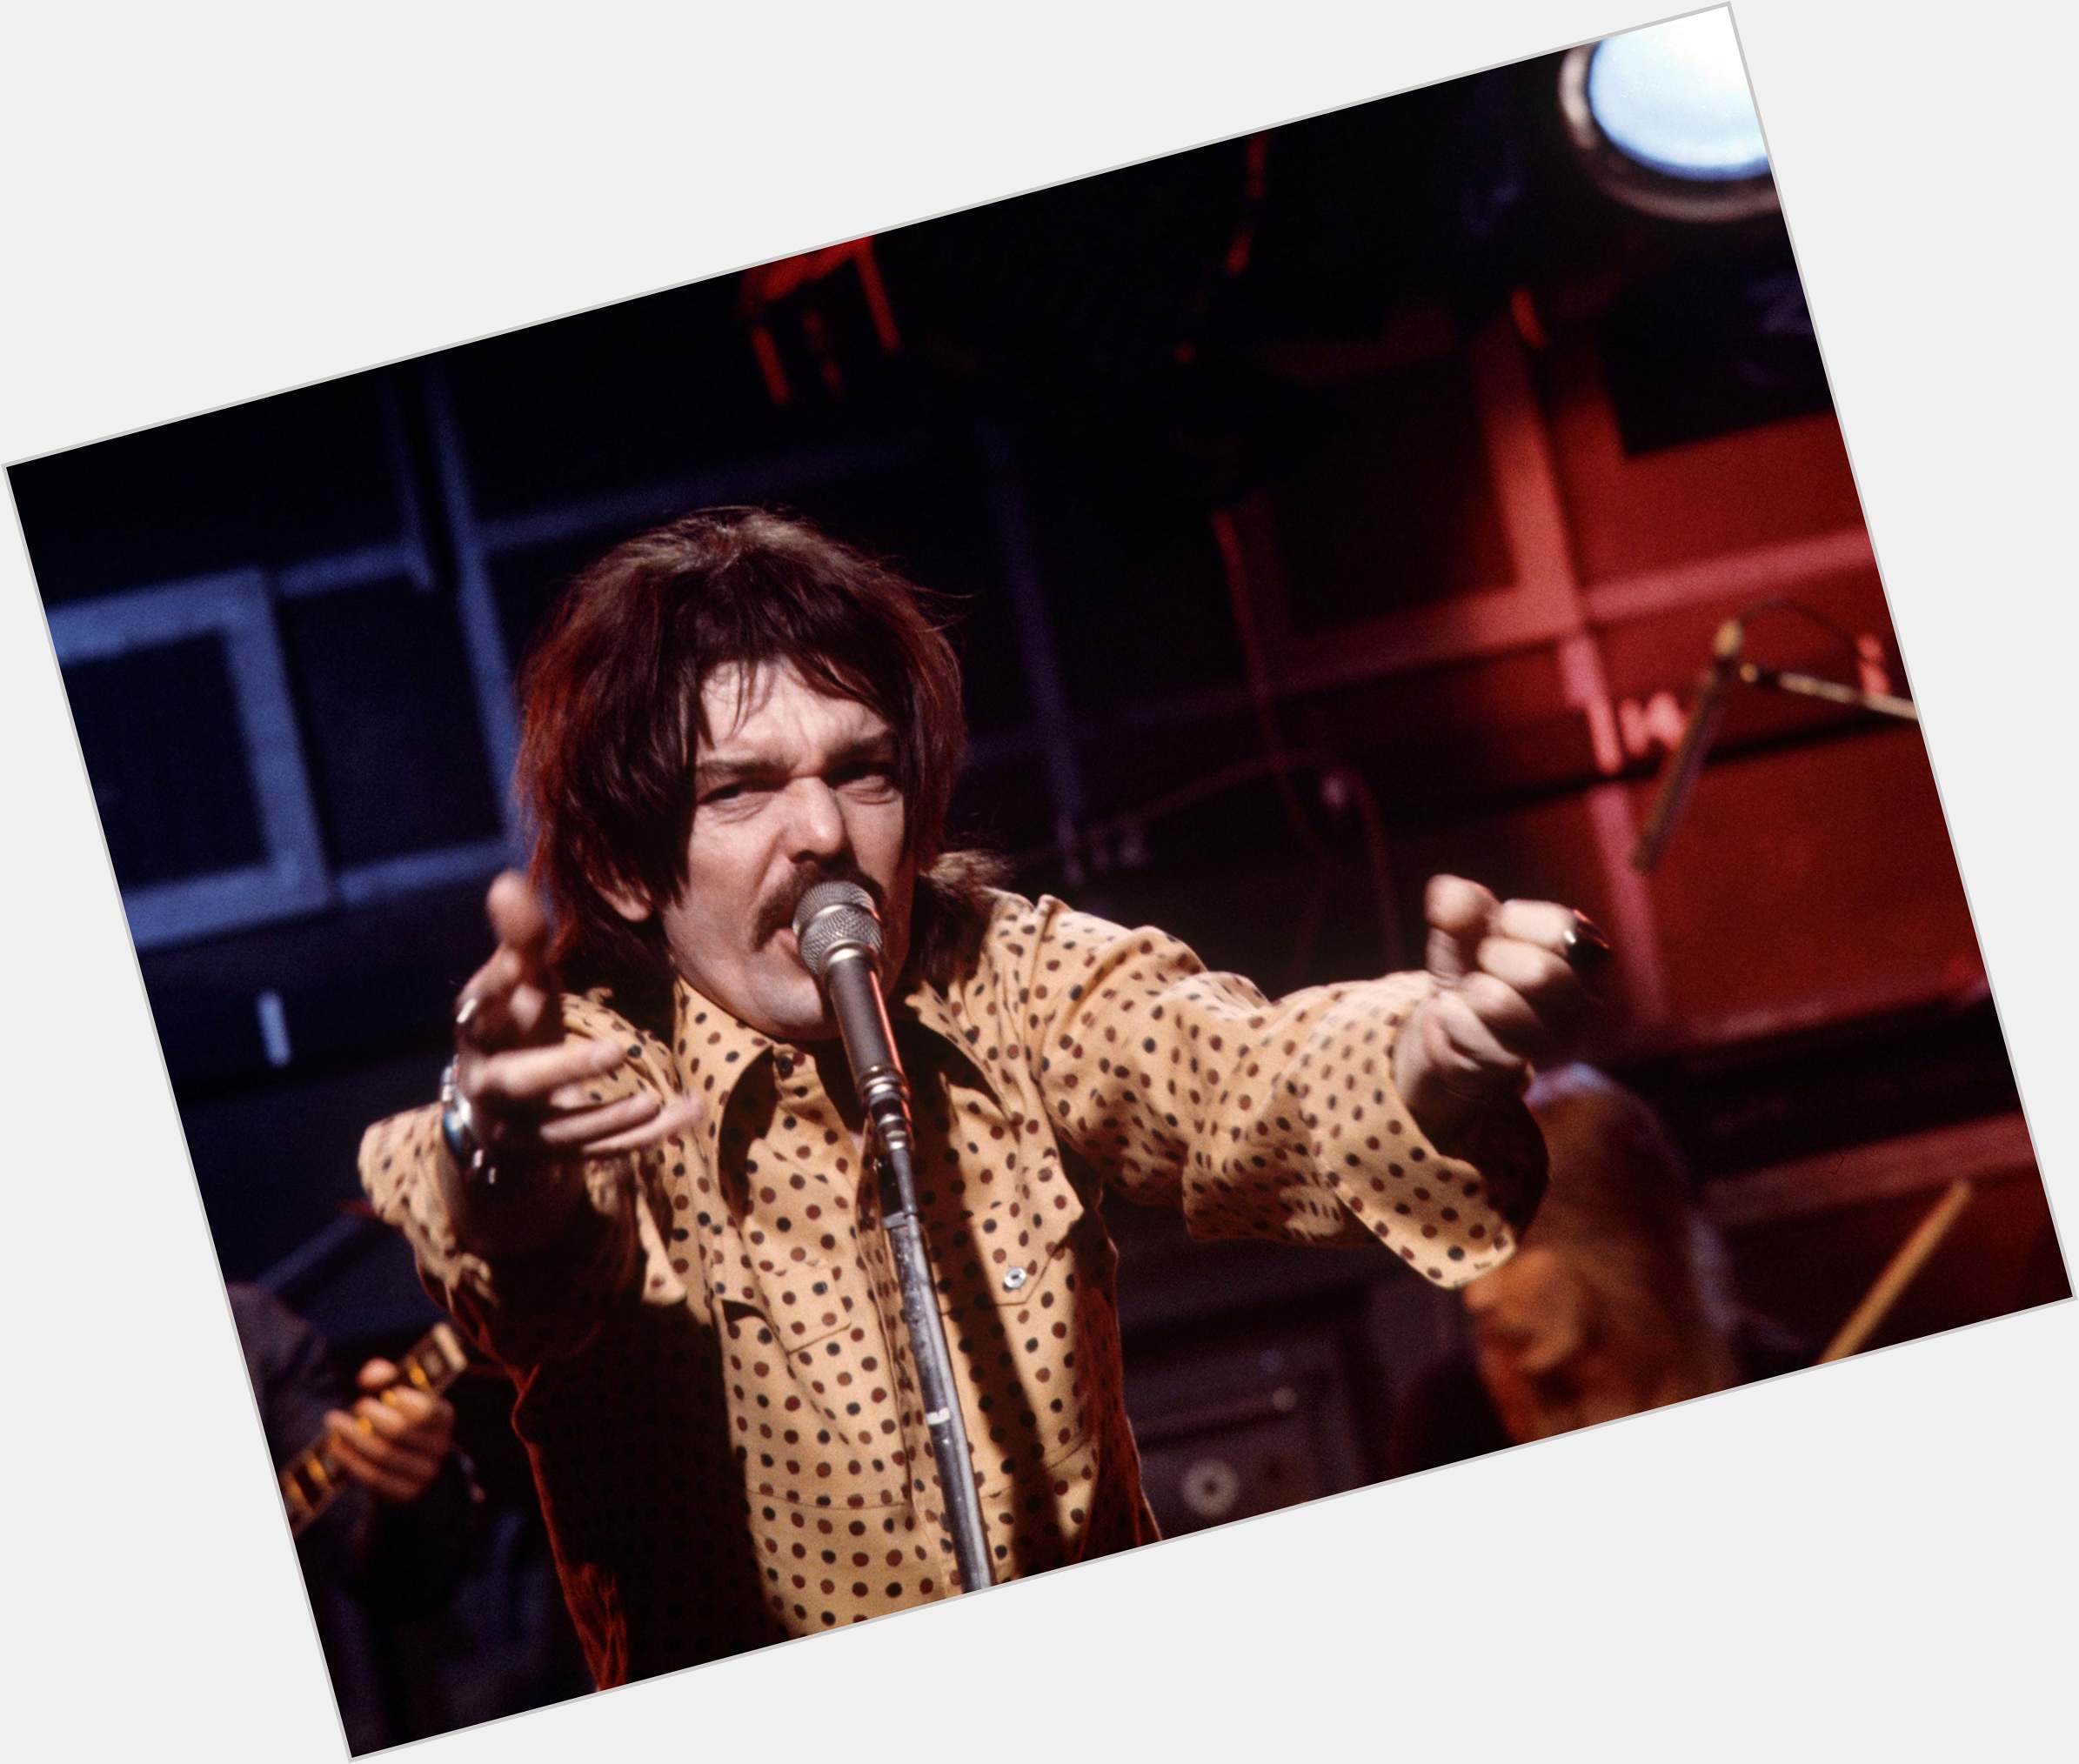 Http://fanpagepress.net/m/C/Captain Beefheart Hairstyle 3